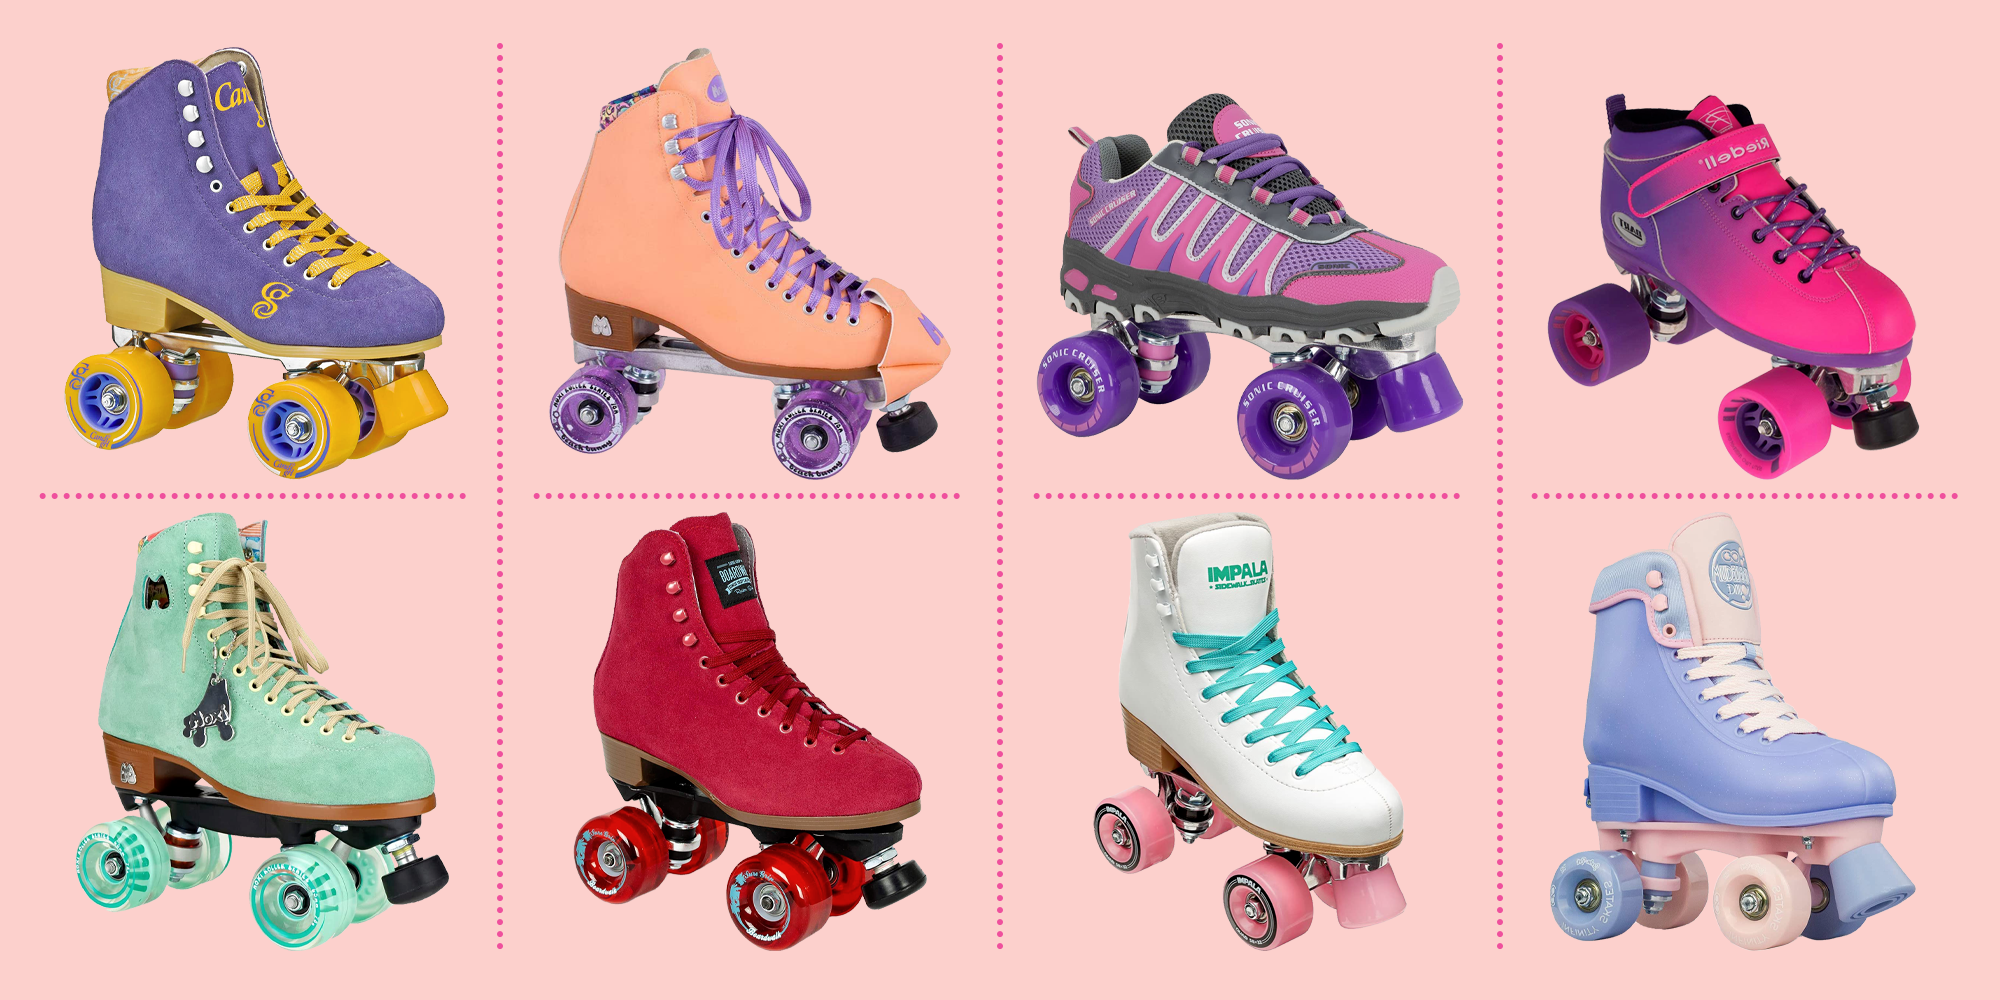 Roller Skates for Women Outdoor Invisible Pulley Shoes Skates with Double-Row Deform Wheel Kick Rollers Shoes Retractable Adults/Kids 